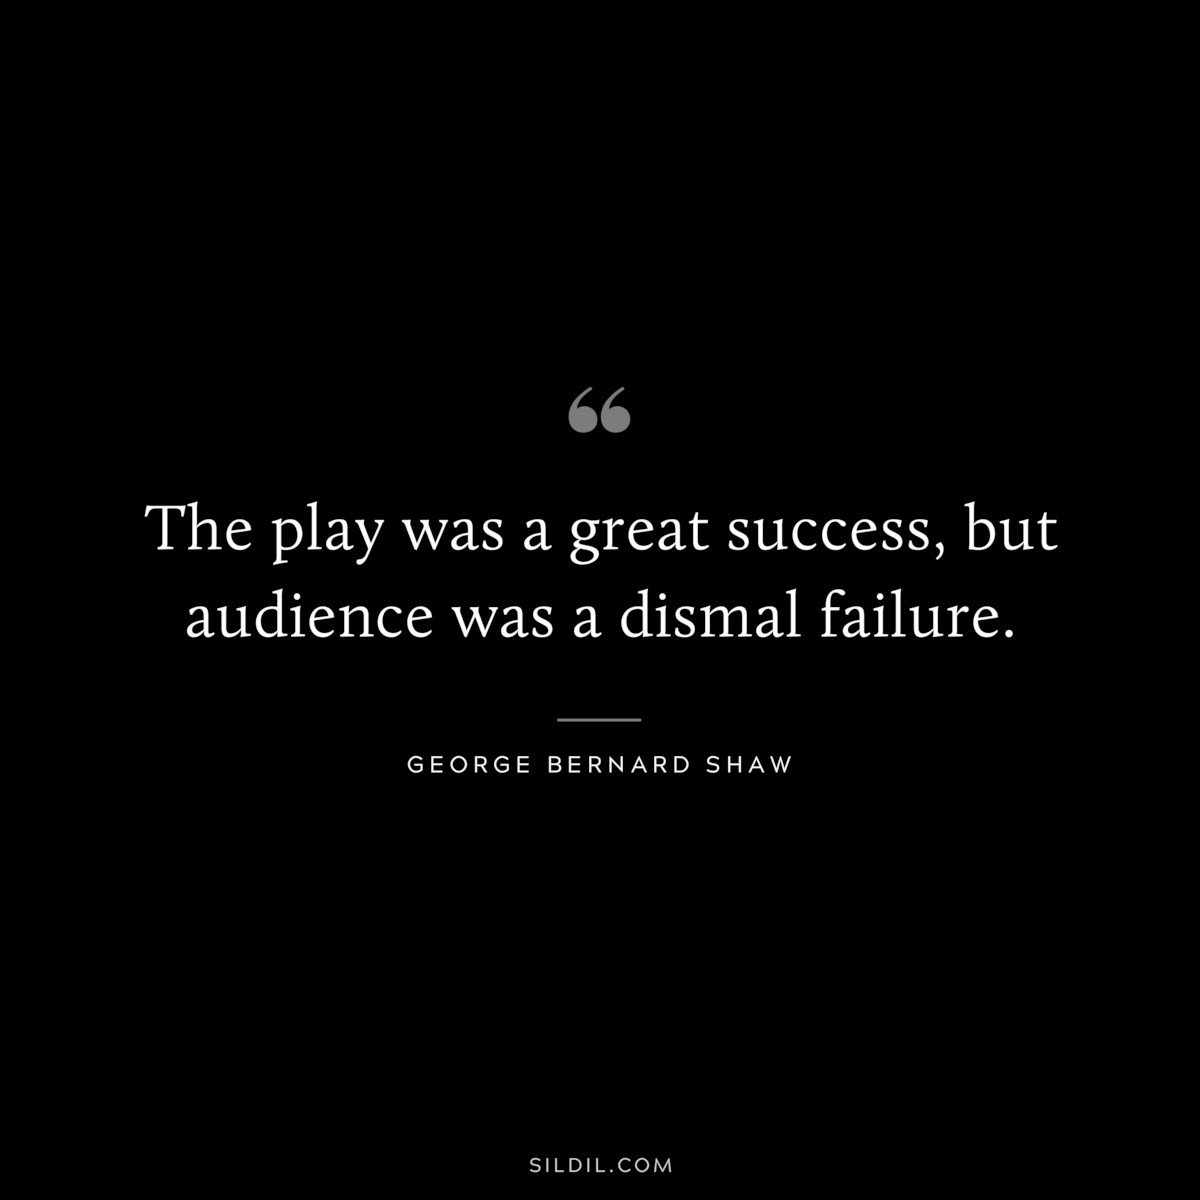 The play was a great success, but audience was a dismal failure. ― George Bernard Shaw